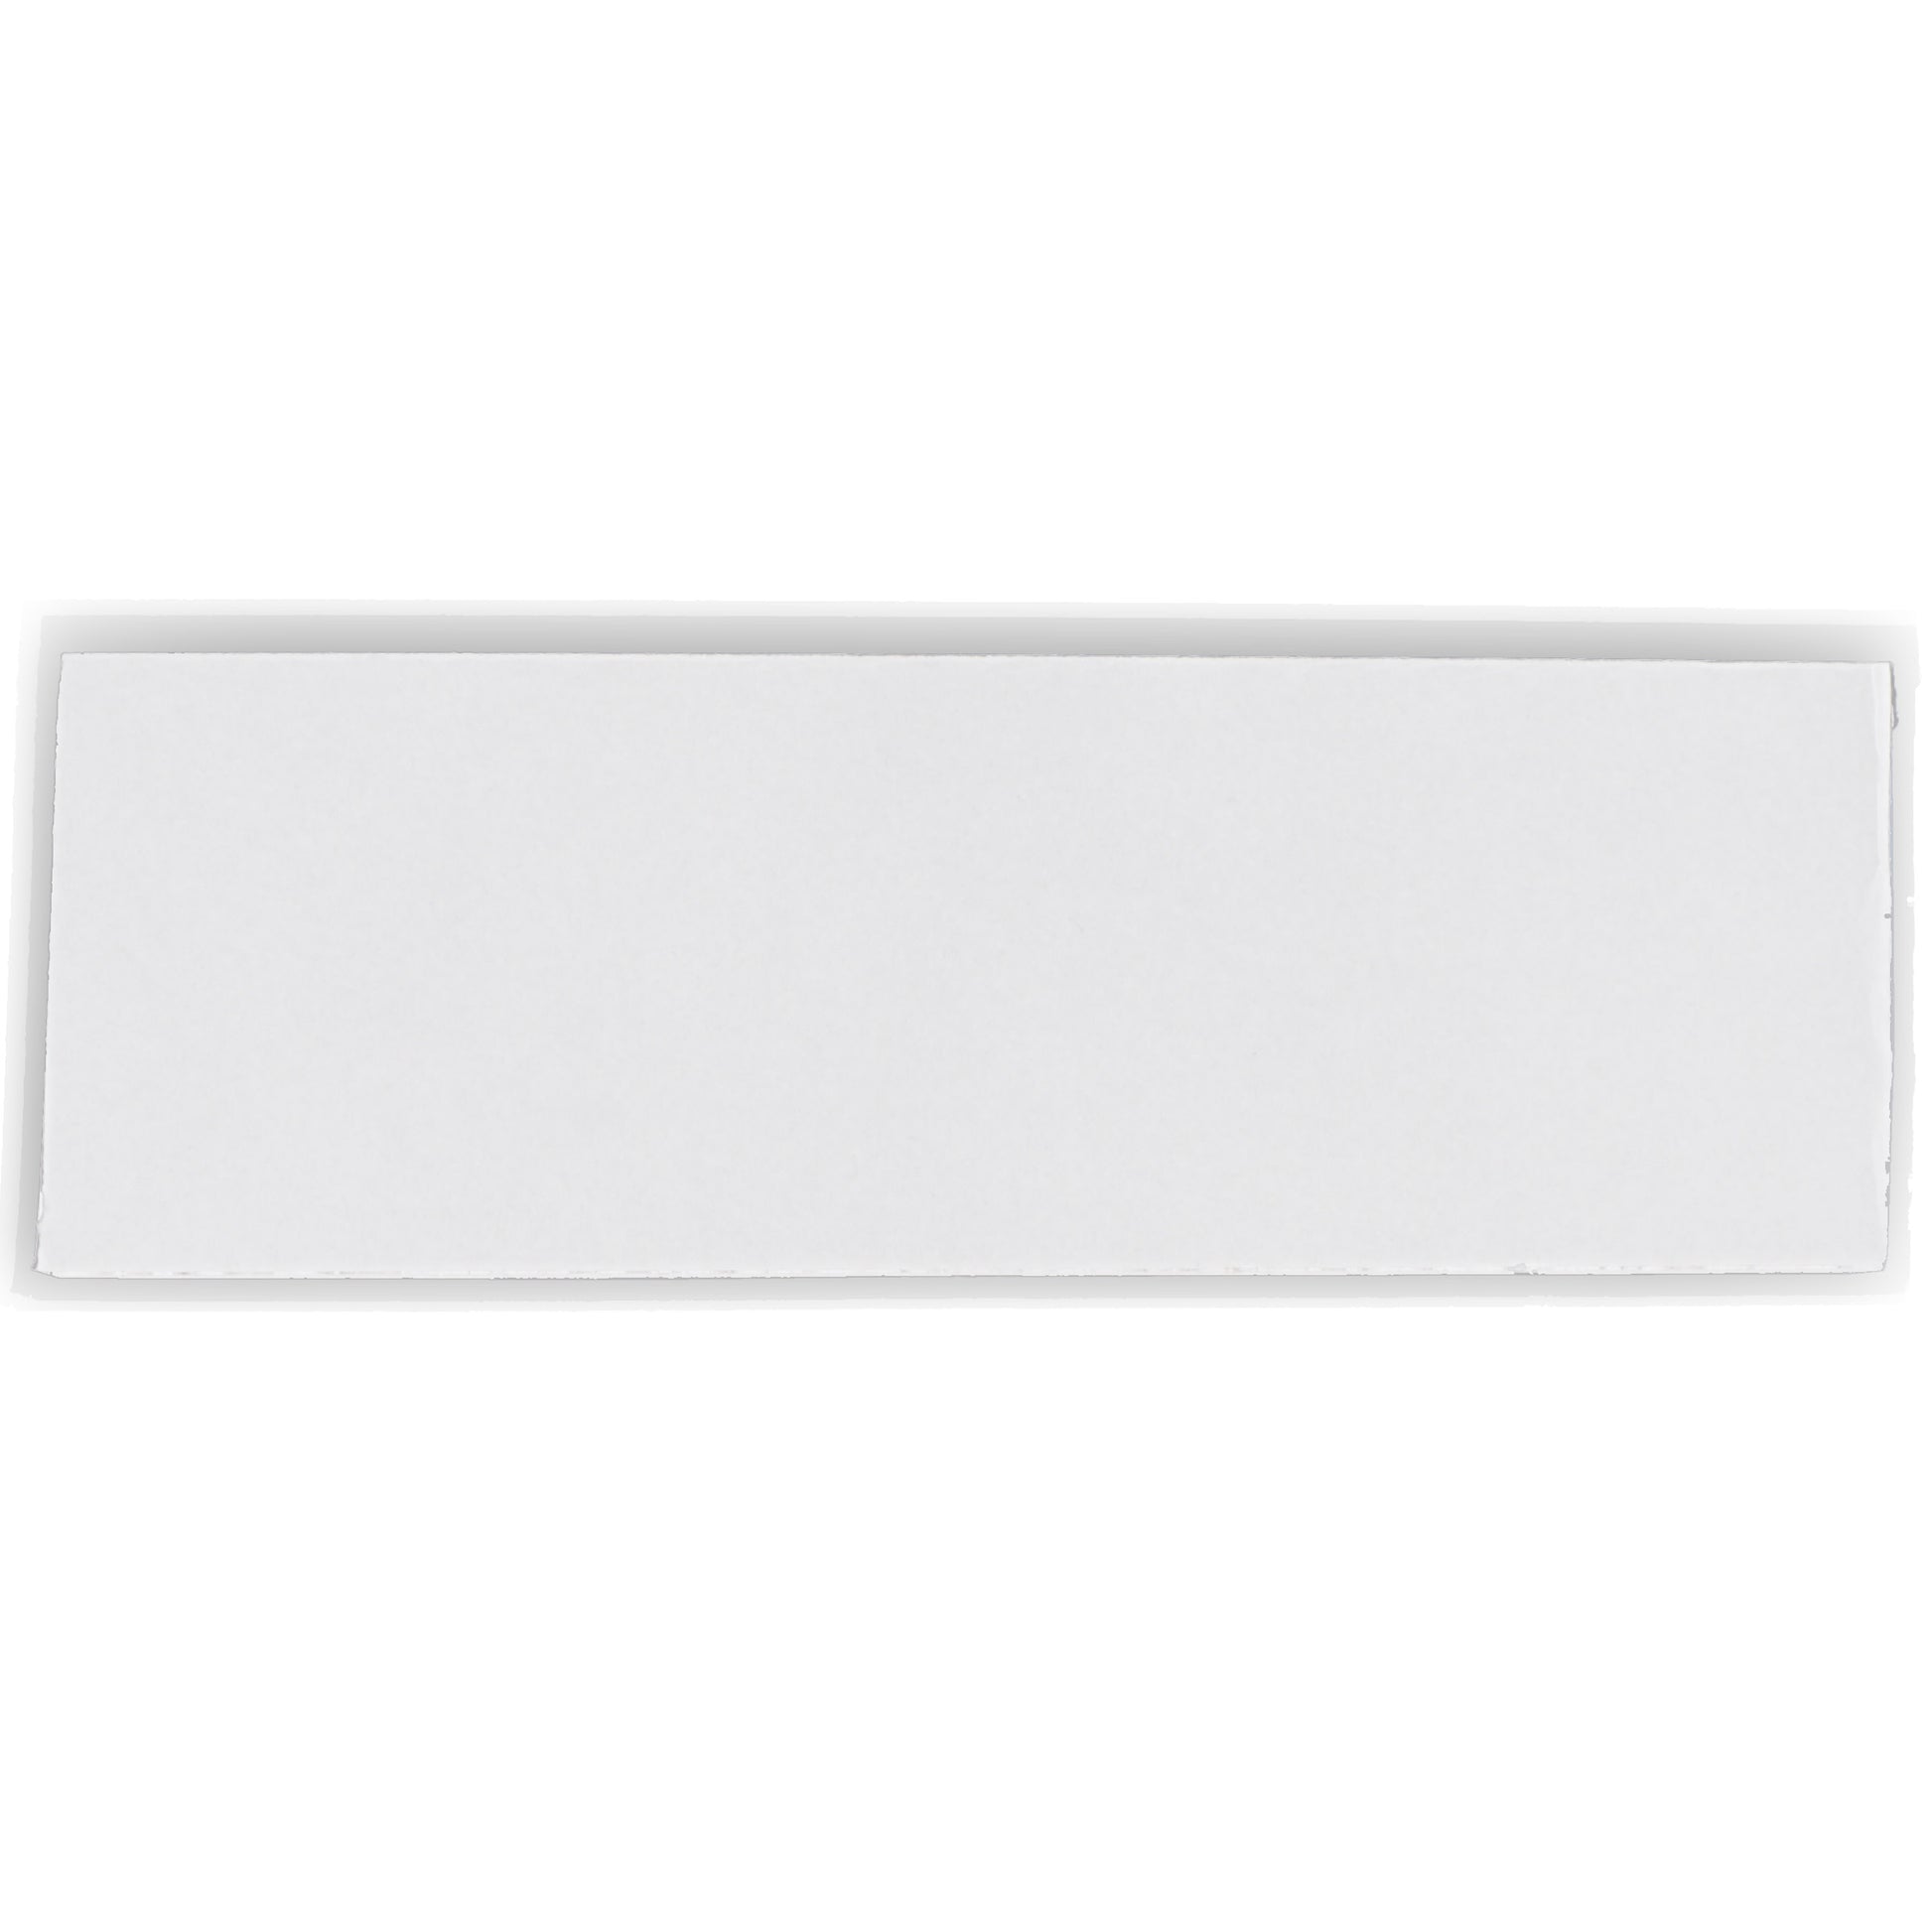 Load image into Gallery viewer, ZG03040W/WKS-F Magnetic Labeling Strip with White Vinyl Surface - Bottom View